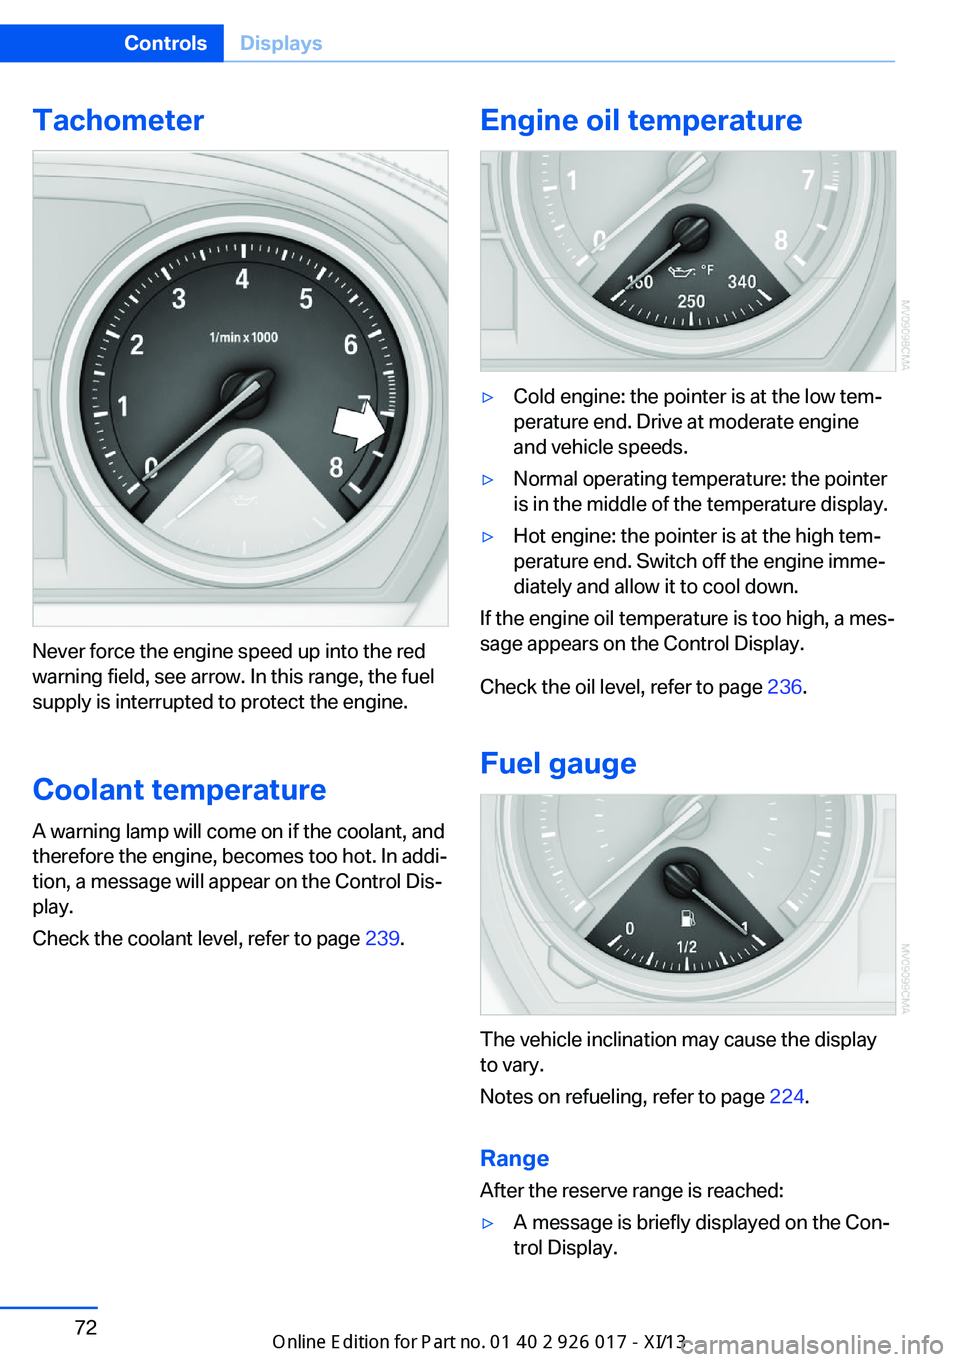 BMW Z4 2013 E89 Owners Manual Tachometer
Never force the engine speed up into the red
warning field, see arrow. In this range, the fuel
supply is interrupted to protect the engine.
Coolant temperature A warning lamp will come on i